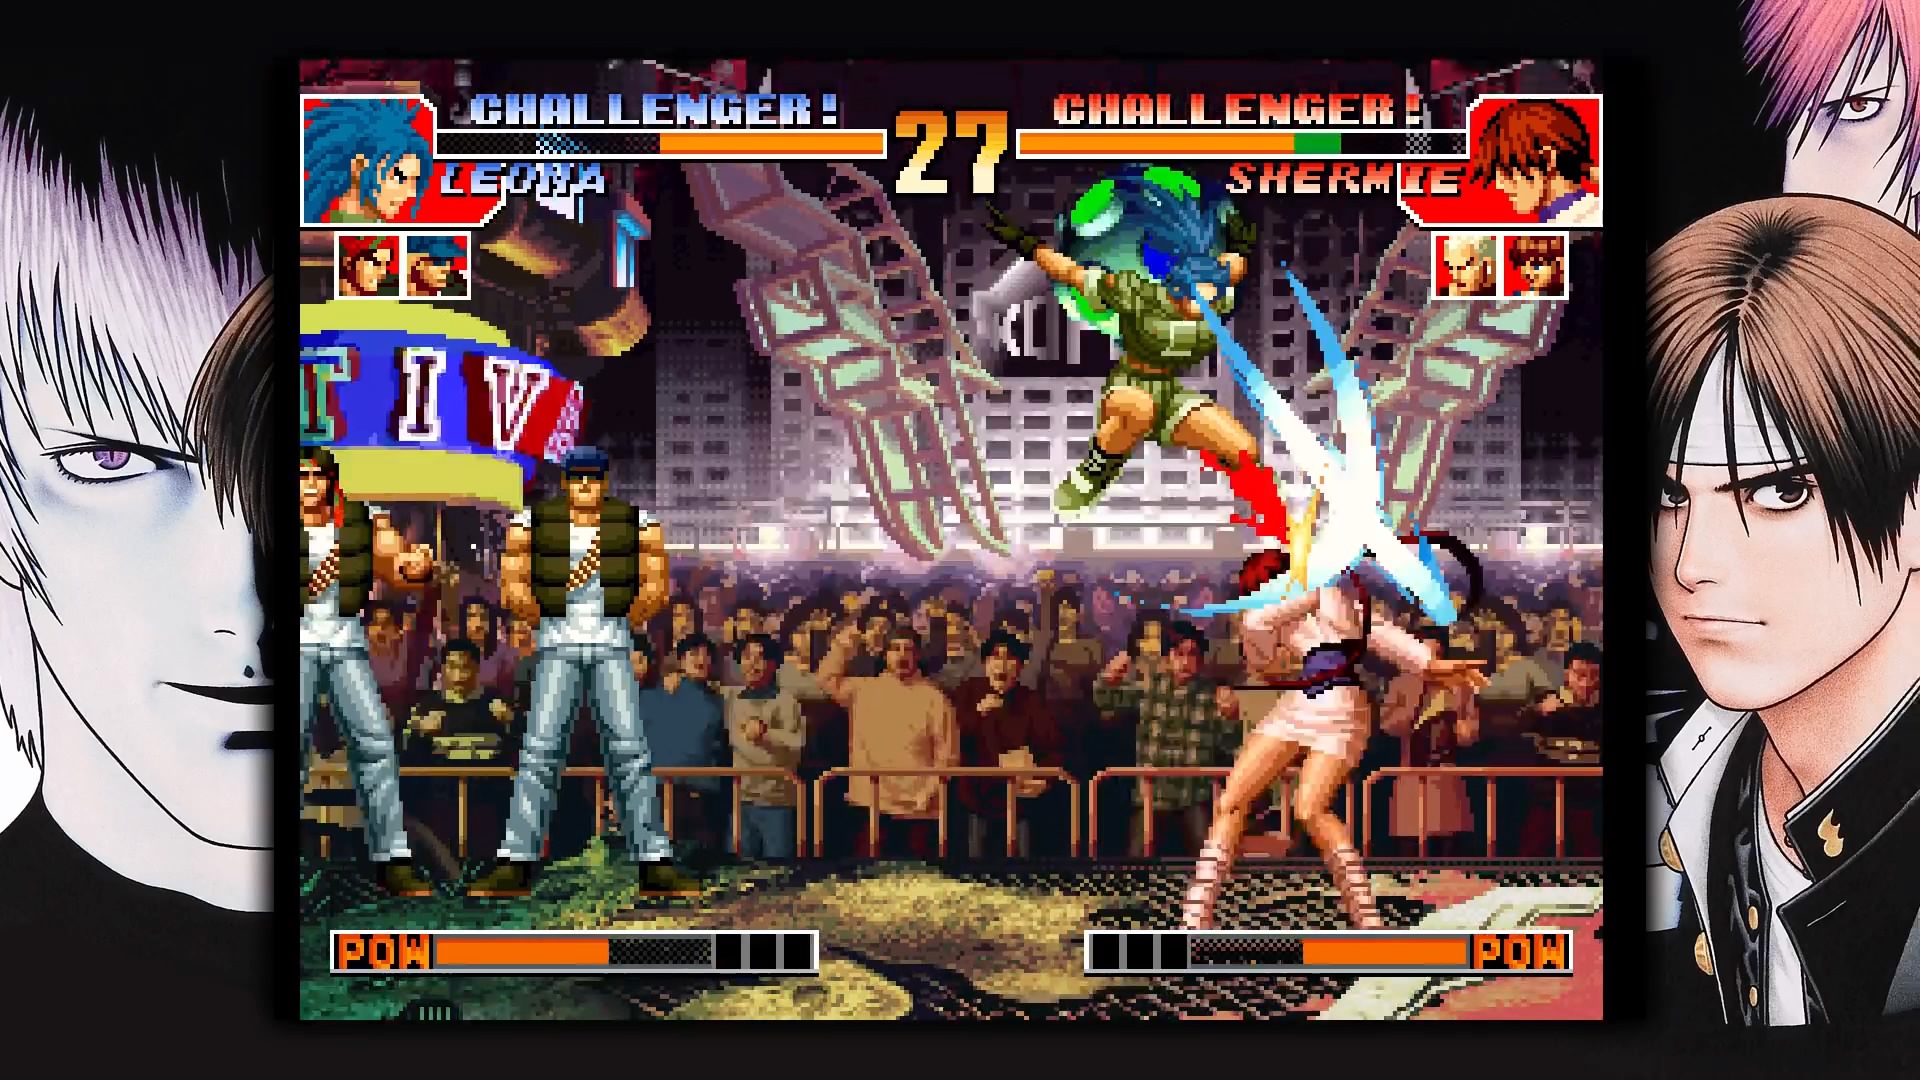 free download game the king of fighter 97